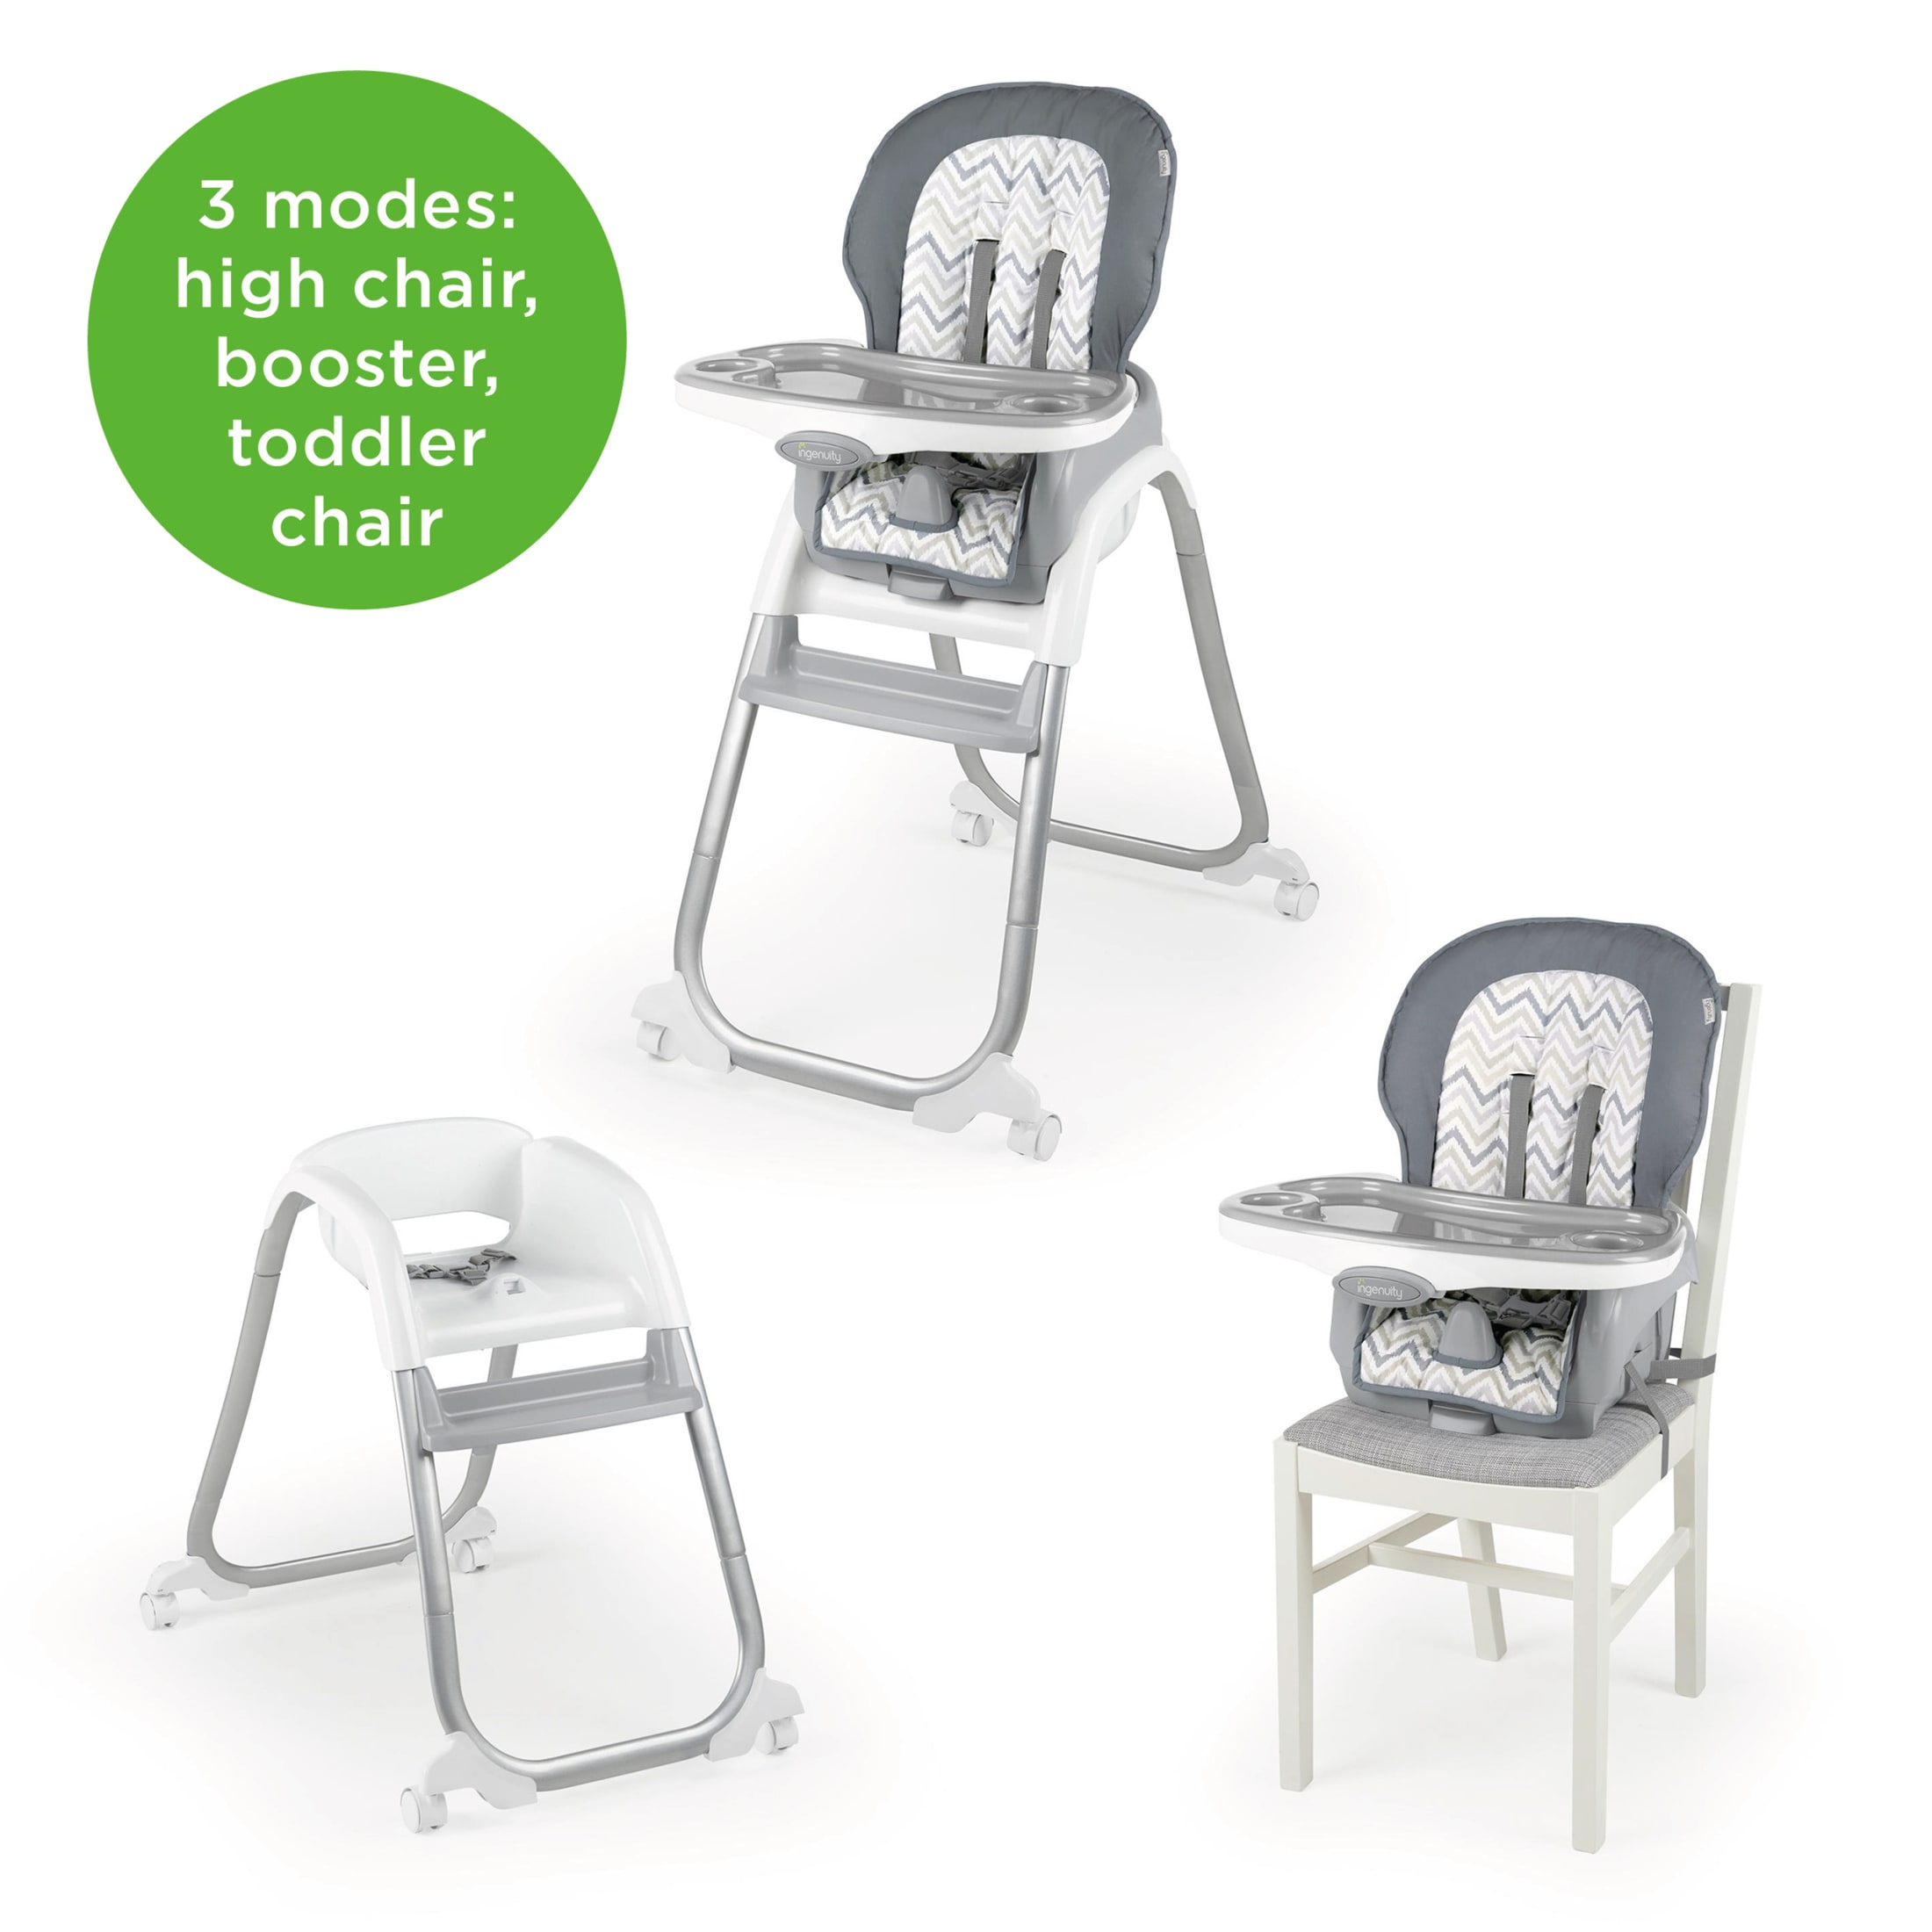 Ingenuity Trio Elite 3-in-1 High Chair, Toddler Chair, and Booster, For Ages 6 Months and Up, Unisex - Braden - image 3 of 13